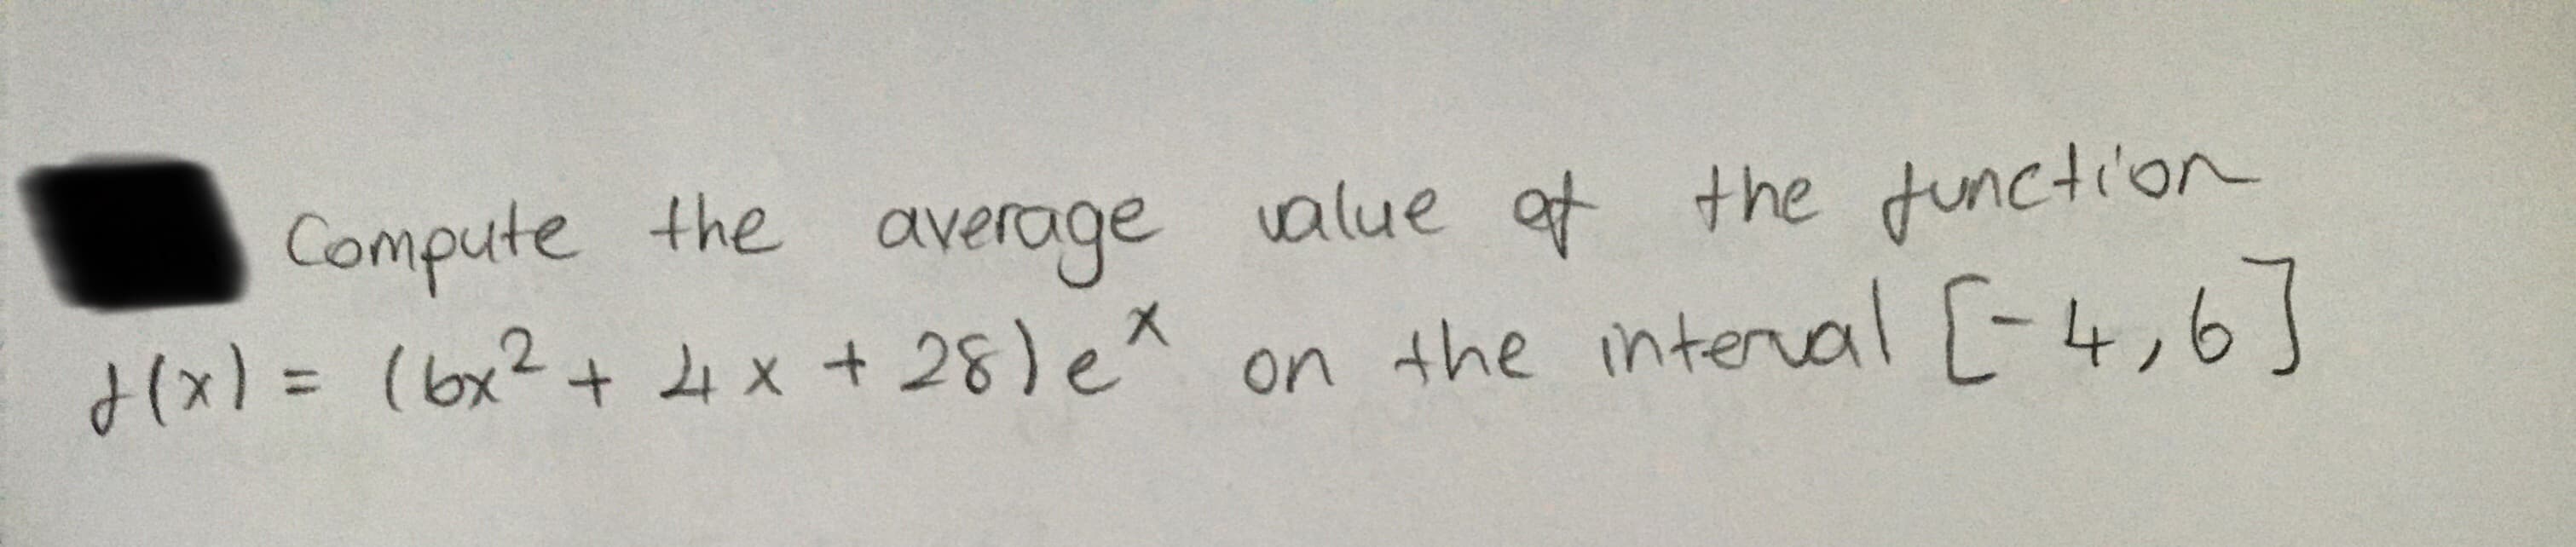 Compute the average value at the function
よ(x) %= (bx2+ x+ 28)e^ on the
d(x) = (bx?+
on the interal -4,6
]
%3D
